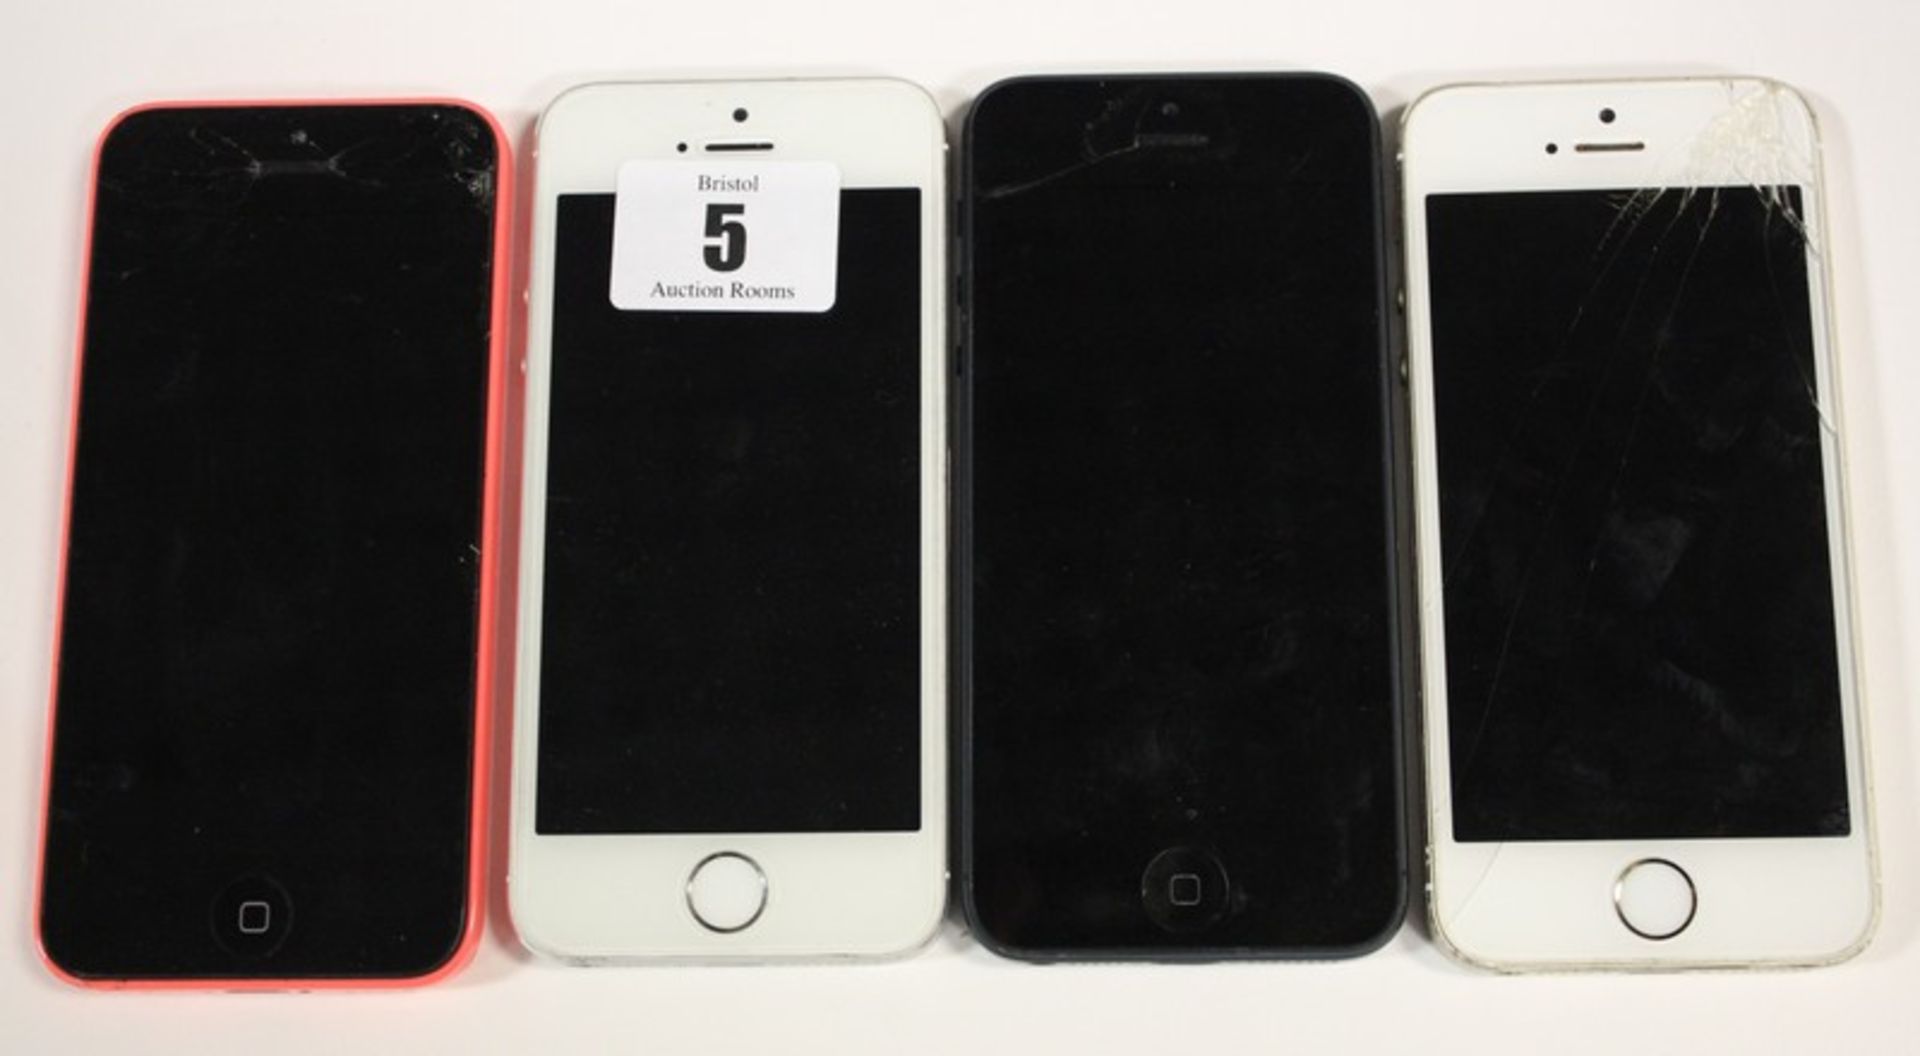 Two iPhone 5S A1457 and A1530 imei: 351988063181219 and 352018067710794 (Both activation locked